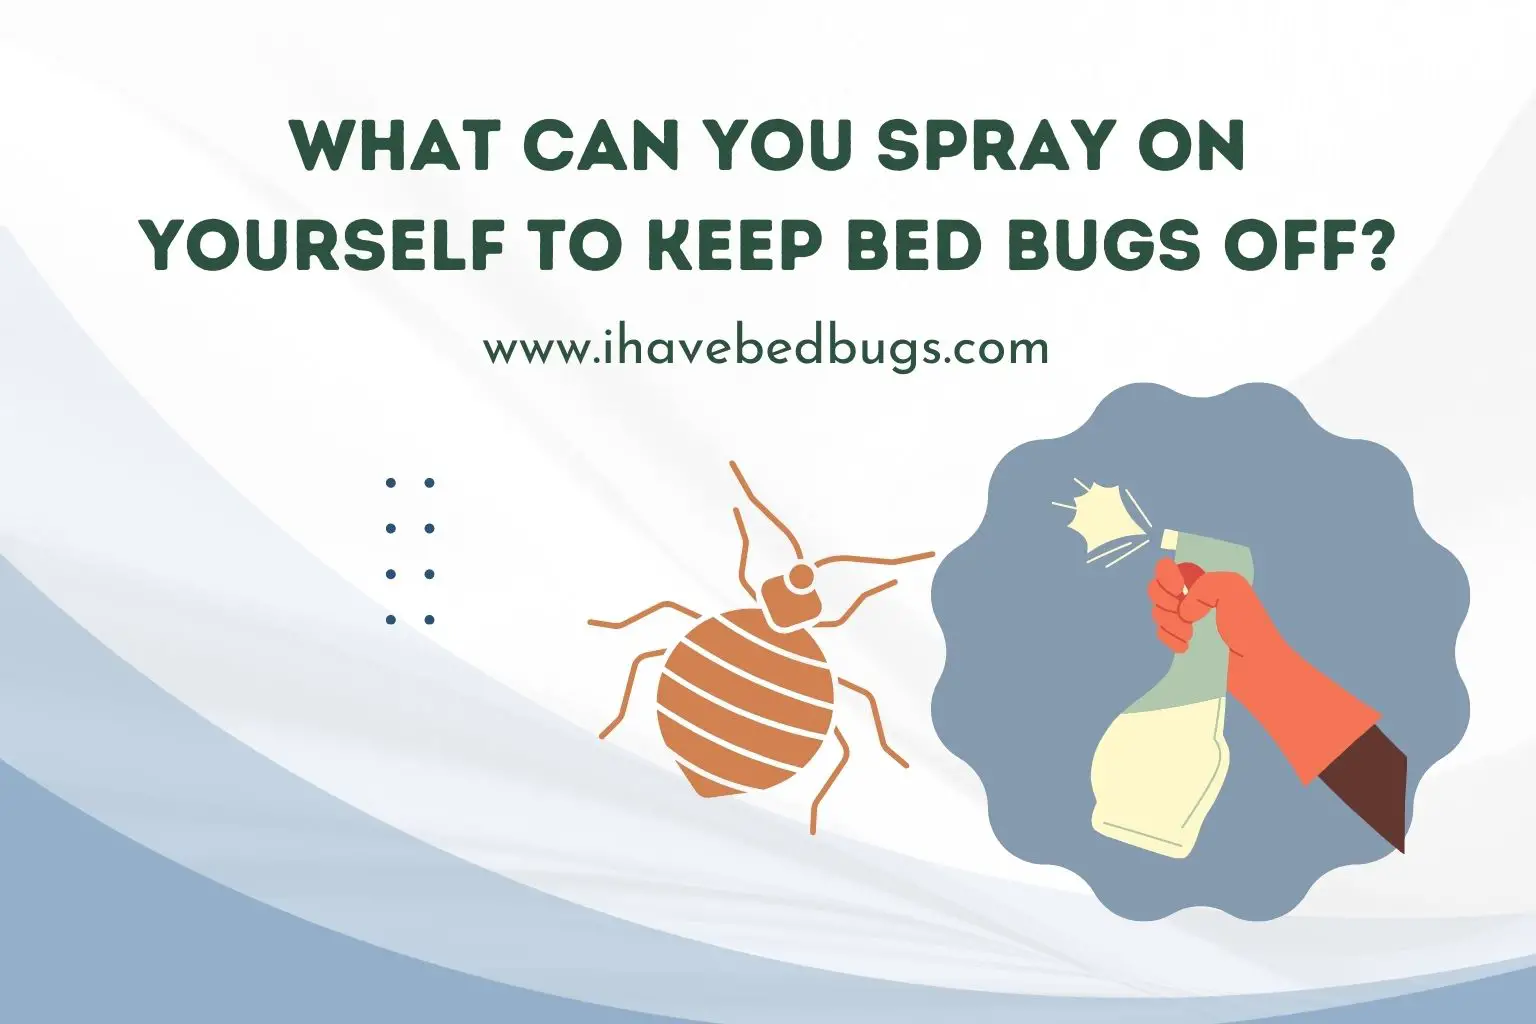 What can you spray on yourself to keep bed bugs off